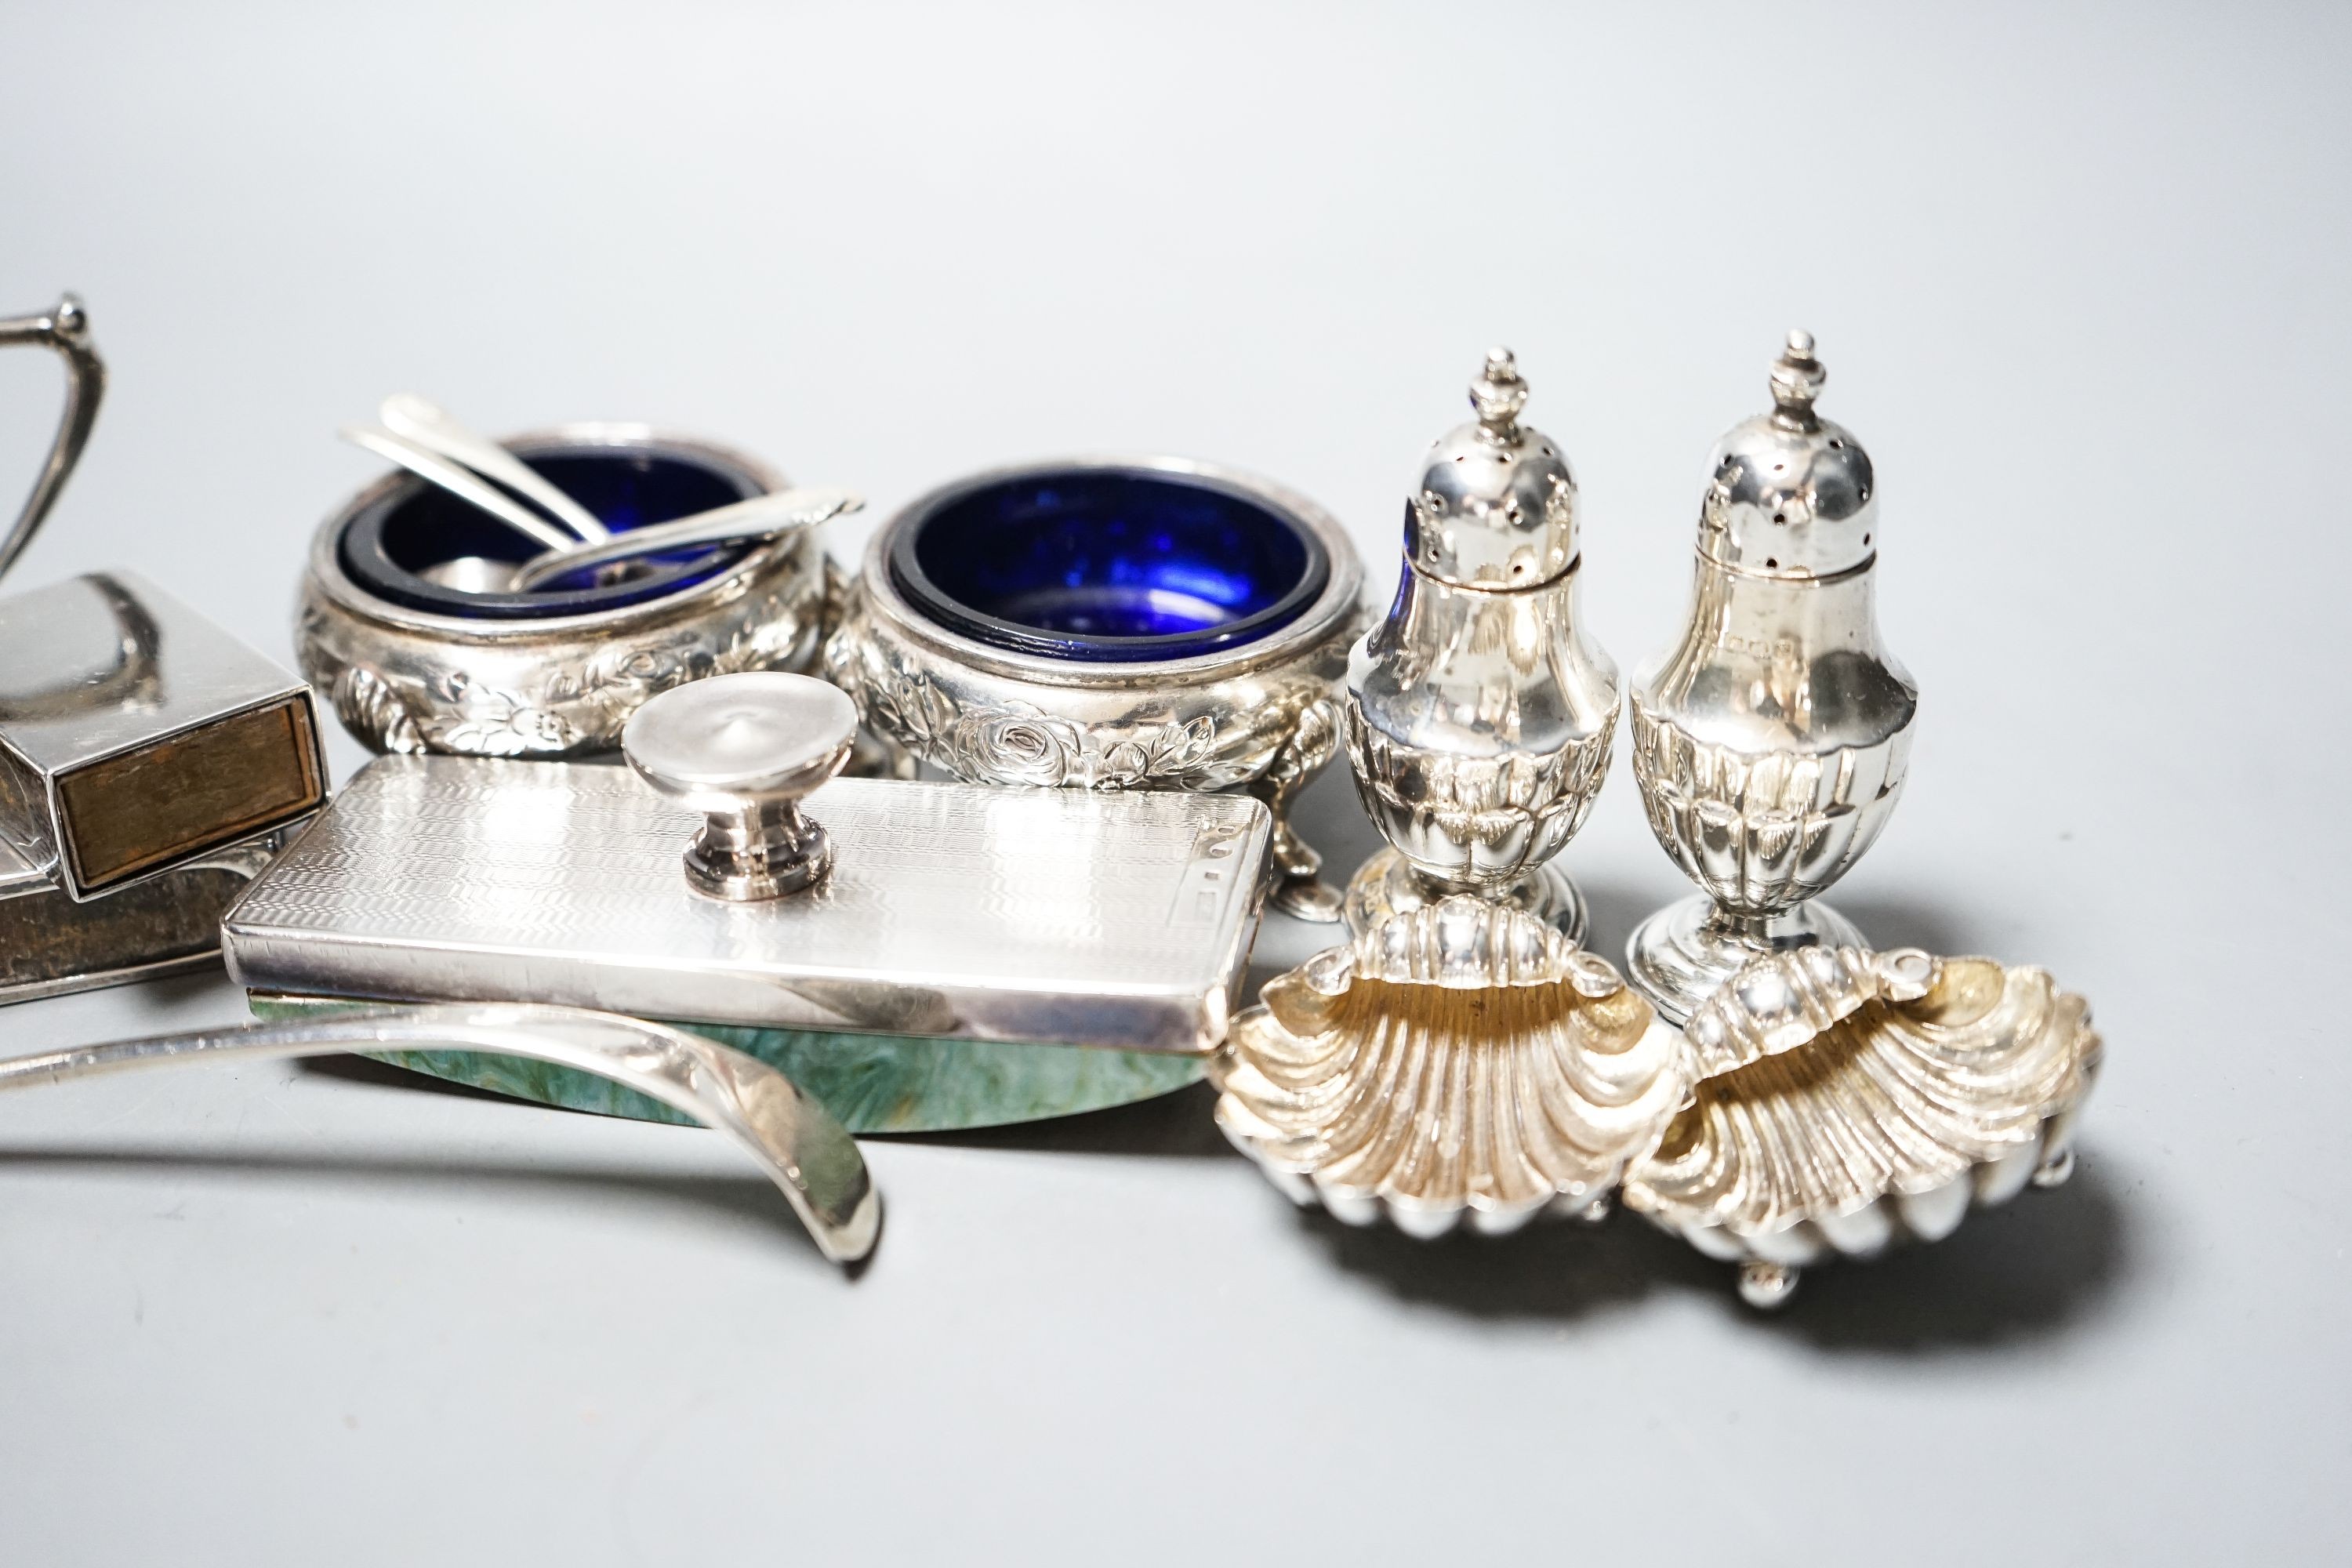 Small silver including a George V silver octagonal mustard, two Victorian bun salts, two shell salts, George III sifter spoon, two condiments, a blotter and two match box sleeves.